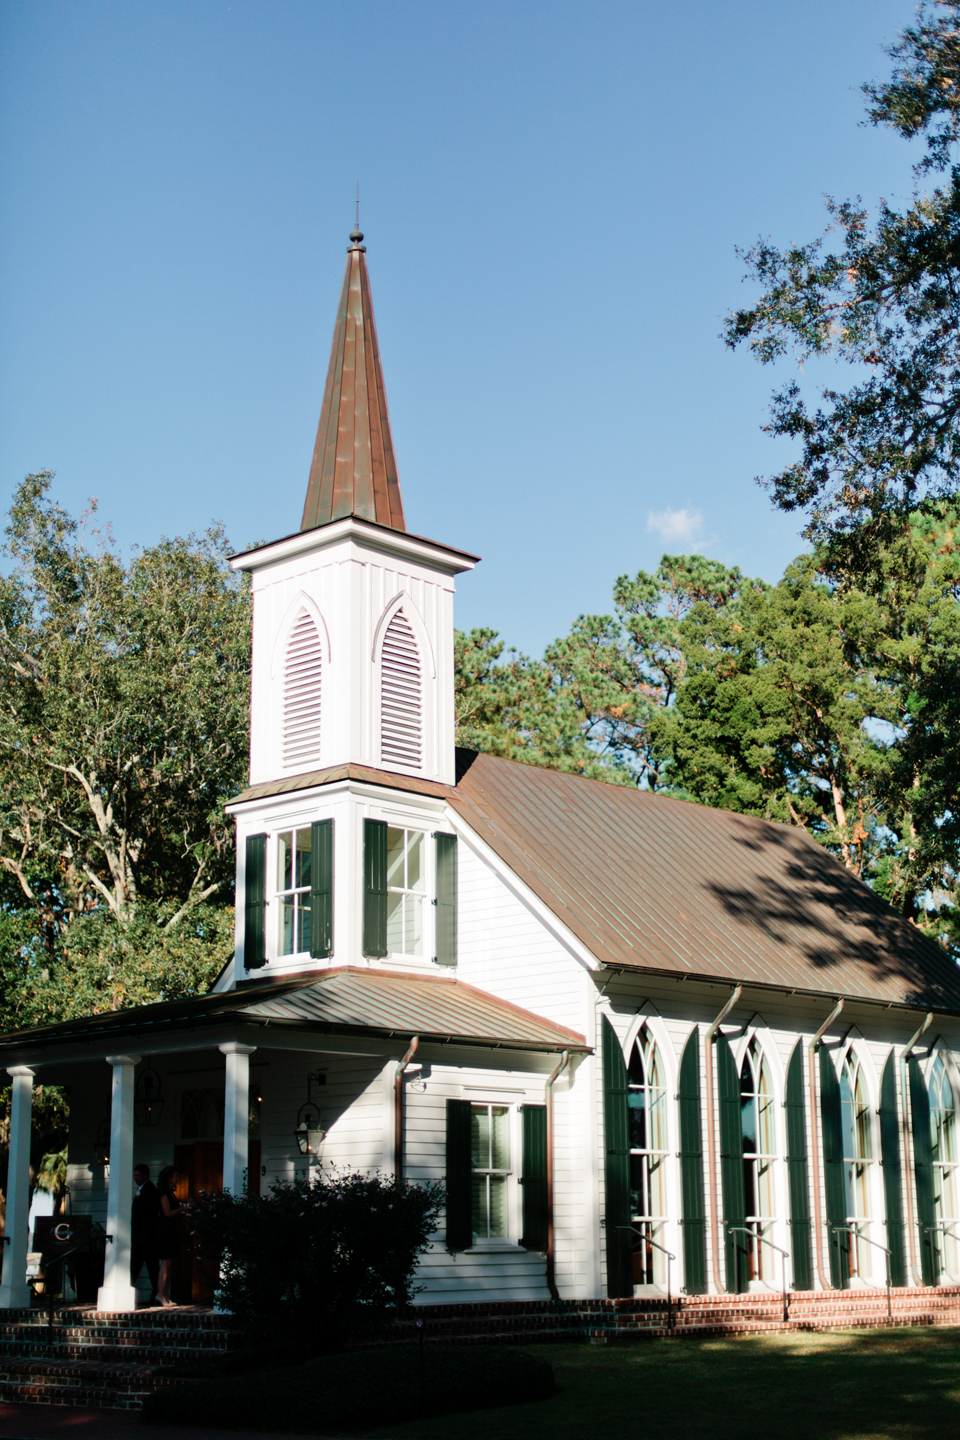 Image of a quaint white chapel with shutters in Montage Palmetto Bluff, coastal South Carolina